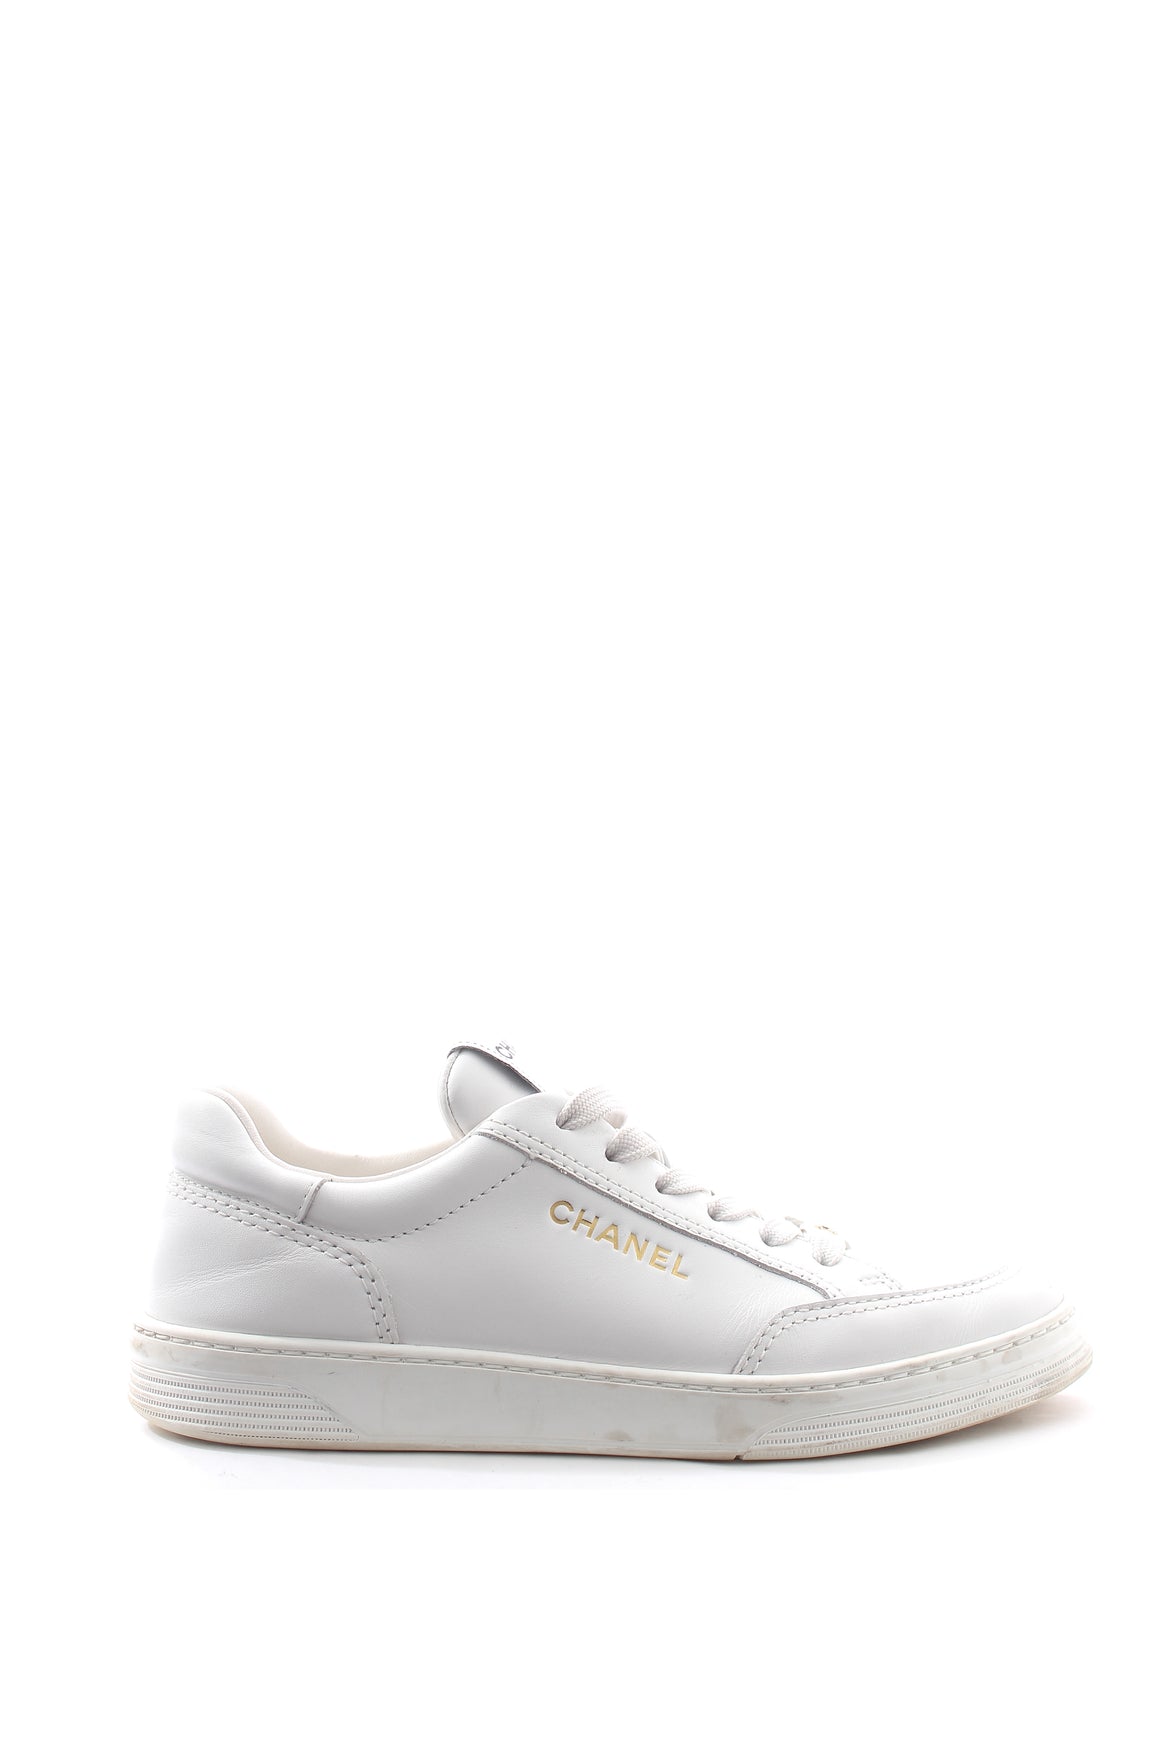 Chanel 23A Leather Sneakers